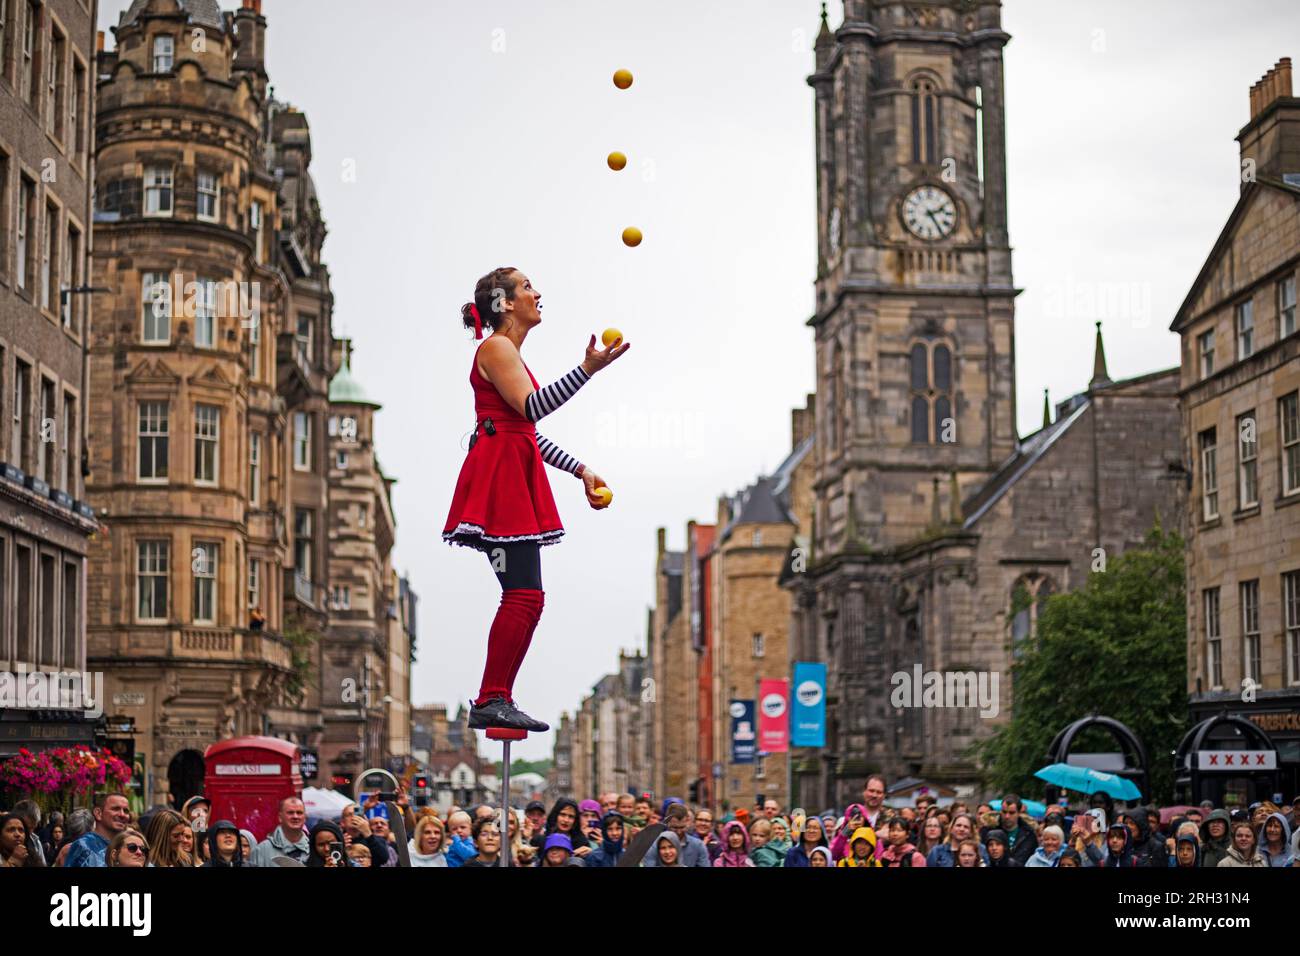 Royal Mile, Edinburgh, Scotland, UK. 13 August 2023. Edinburgh Festival Fringe performers suffered heavy downpours during their shows on the High Street on the second Sunday of the arts festival, the brollies went up, waterproofs on and the audiences in the most part stuck around. Pictured:StreetPerformer Kate the Great demonstrates her balance and juggling skills to a very wet audience on the Royal Mile. Credit: Archwhite/alamy live news. Stock Photo